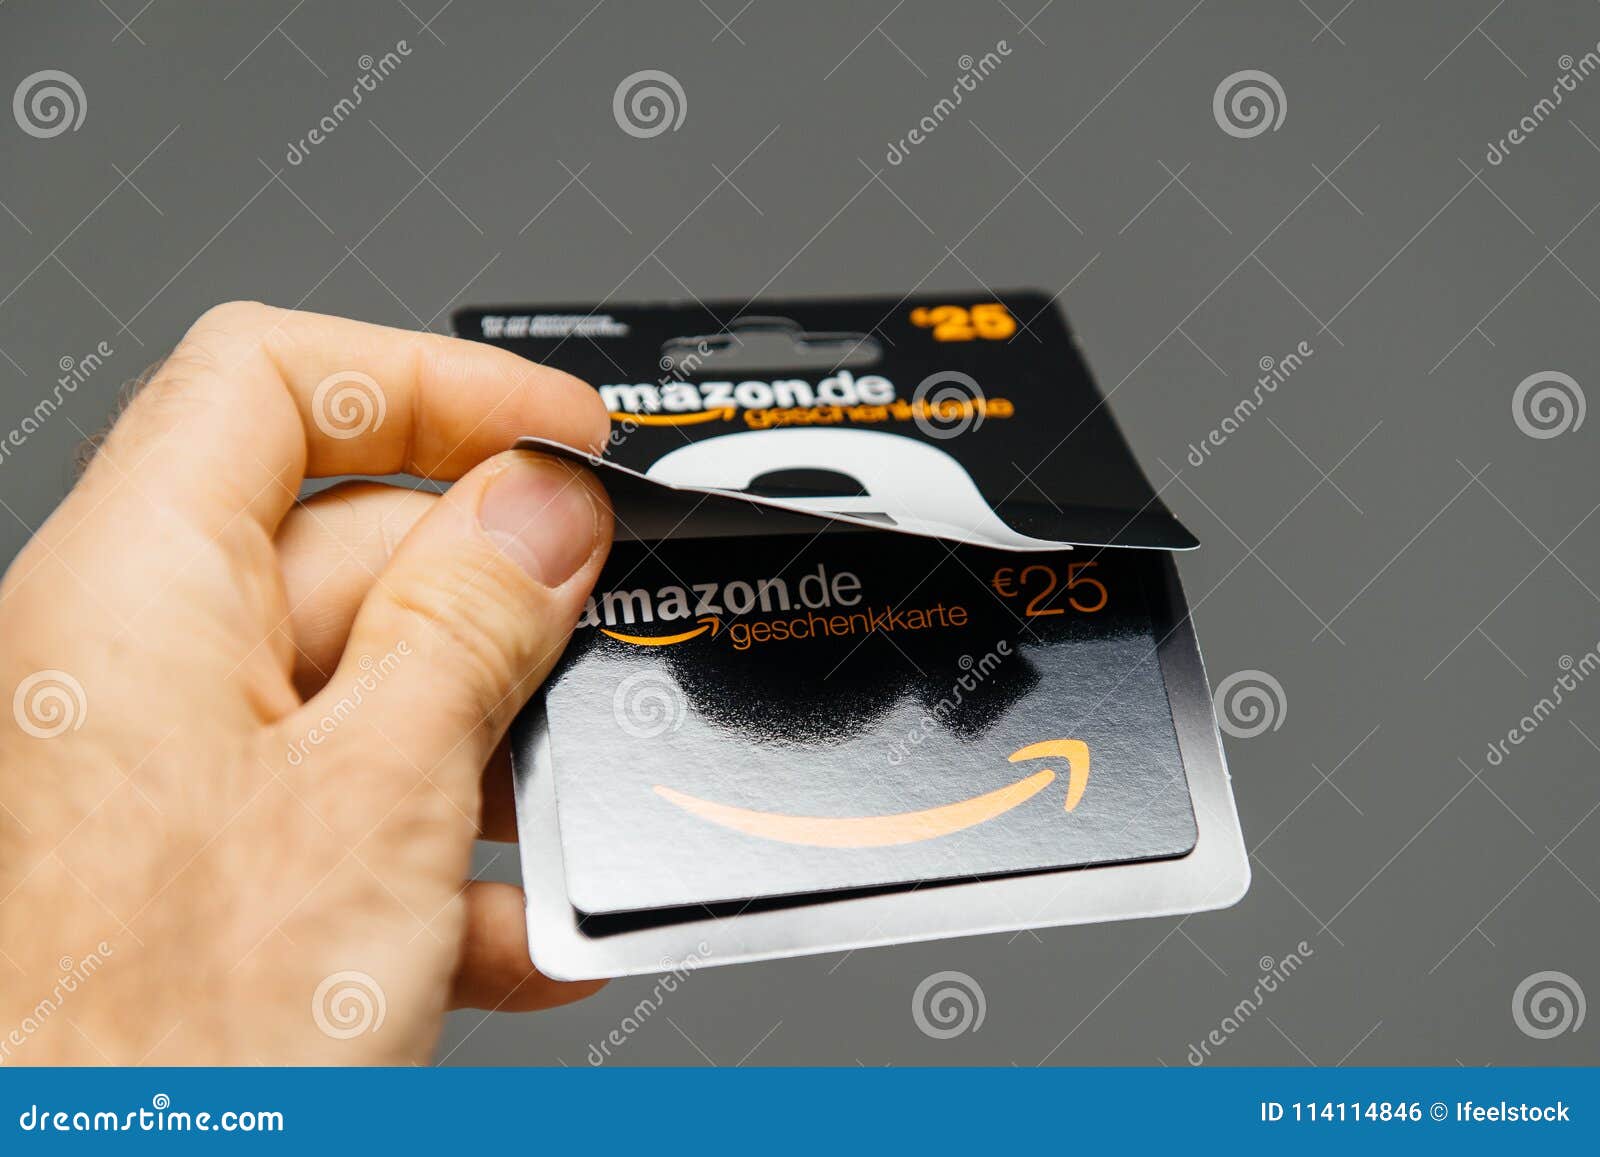 Picture Of Used Amazon Gift Card